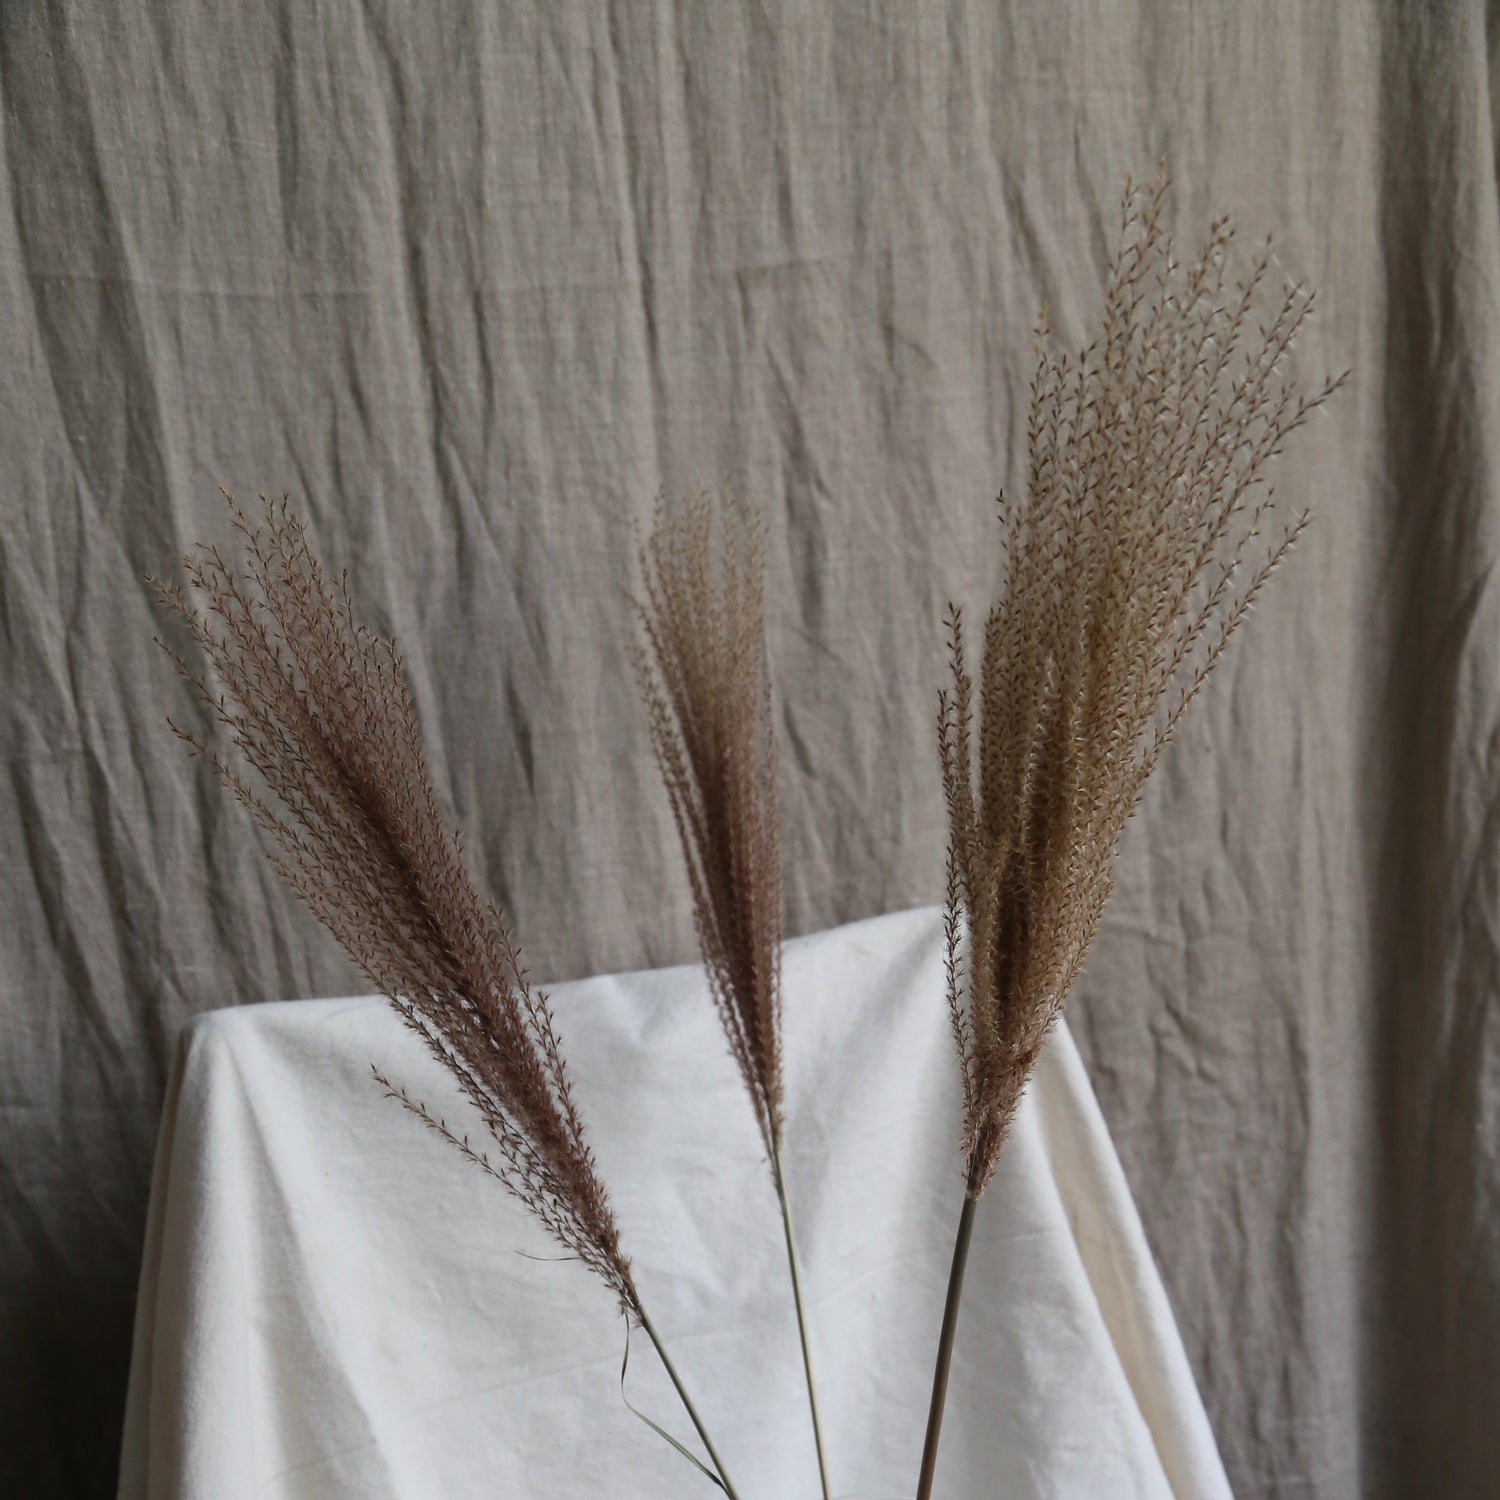 Brown eulaila grass bunch available at Rook & Rose.